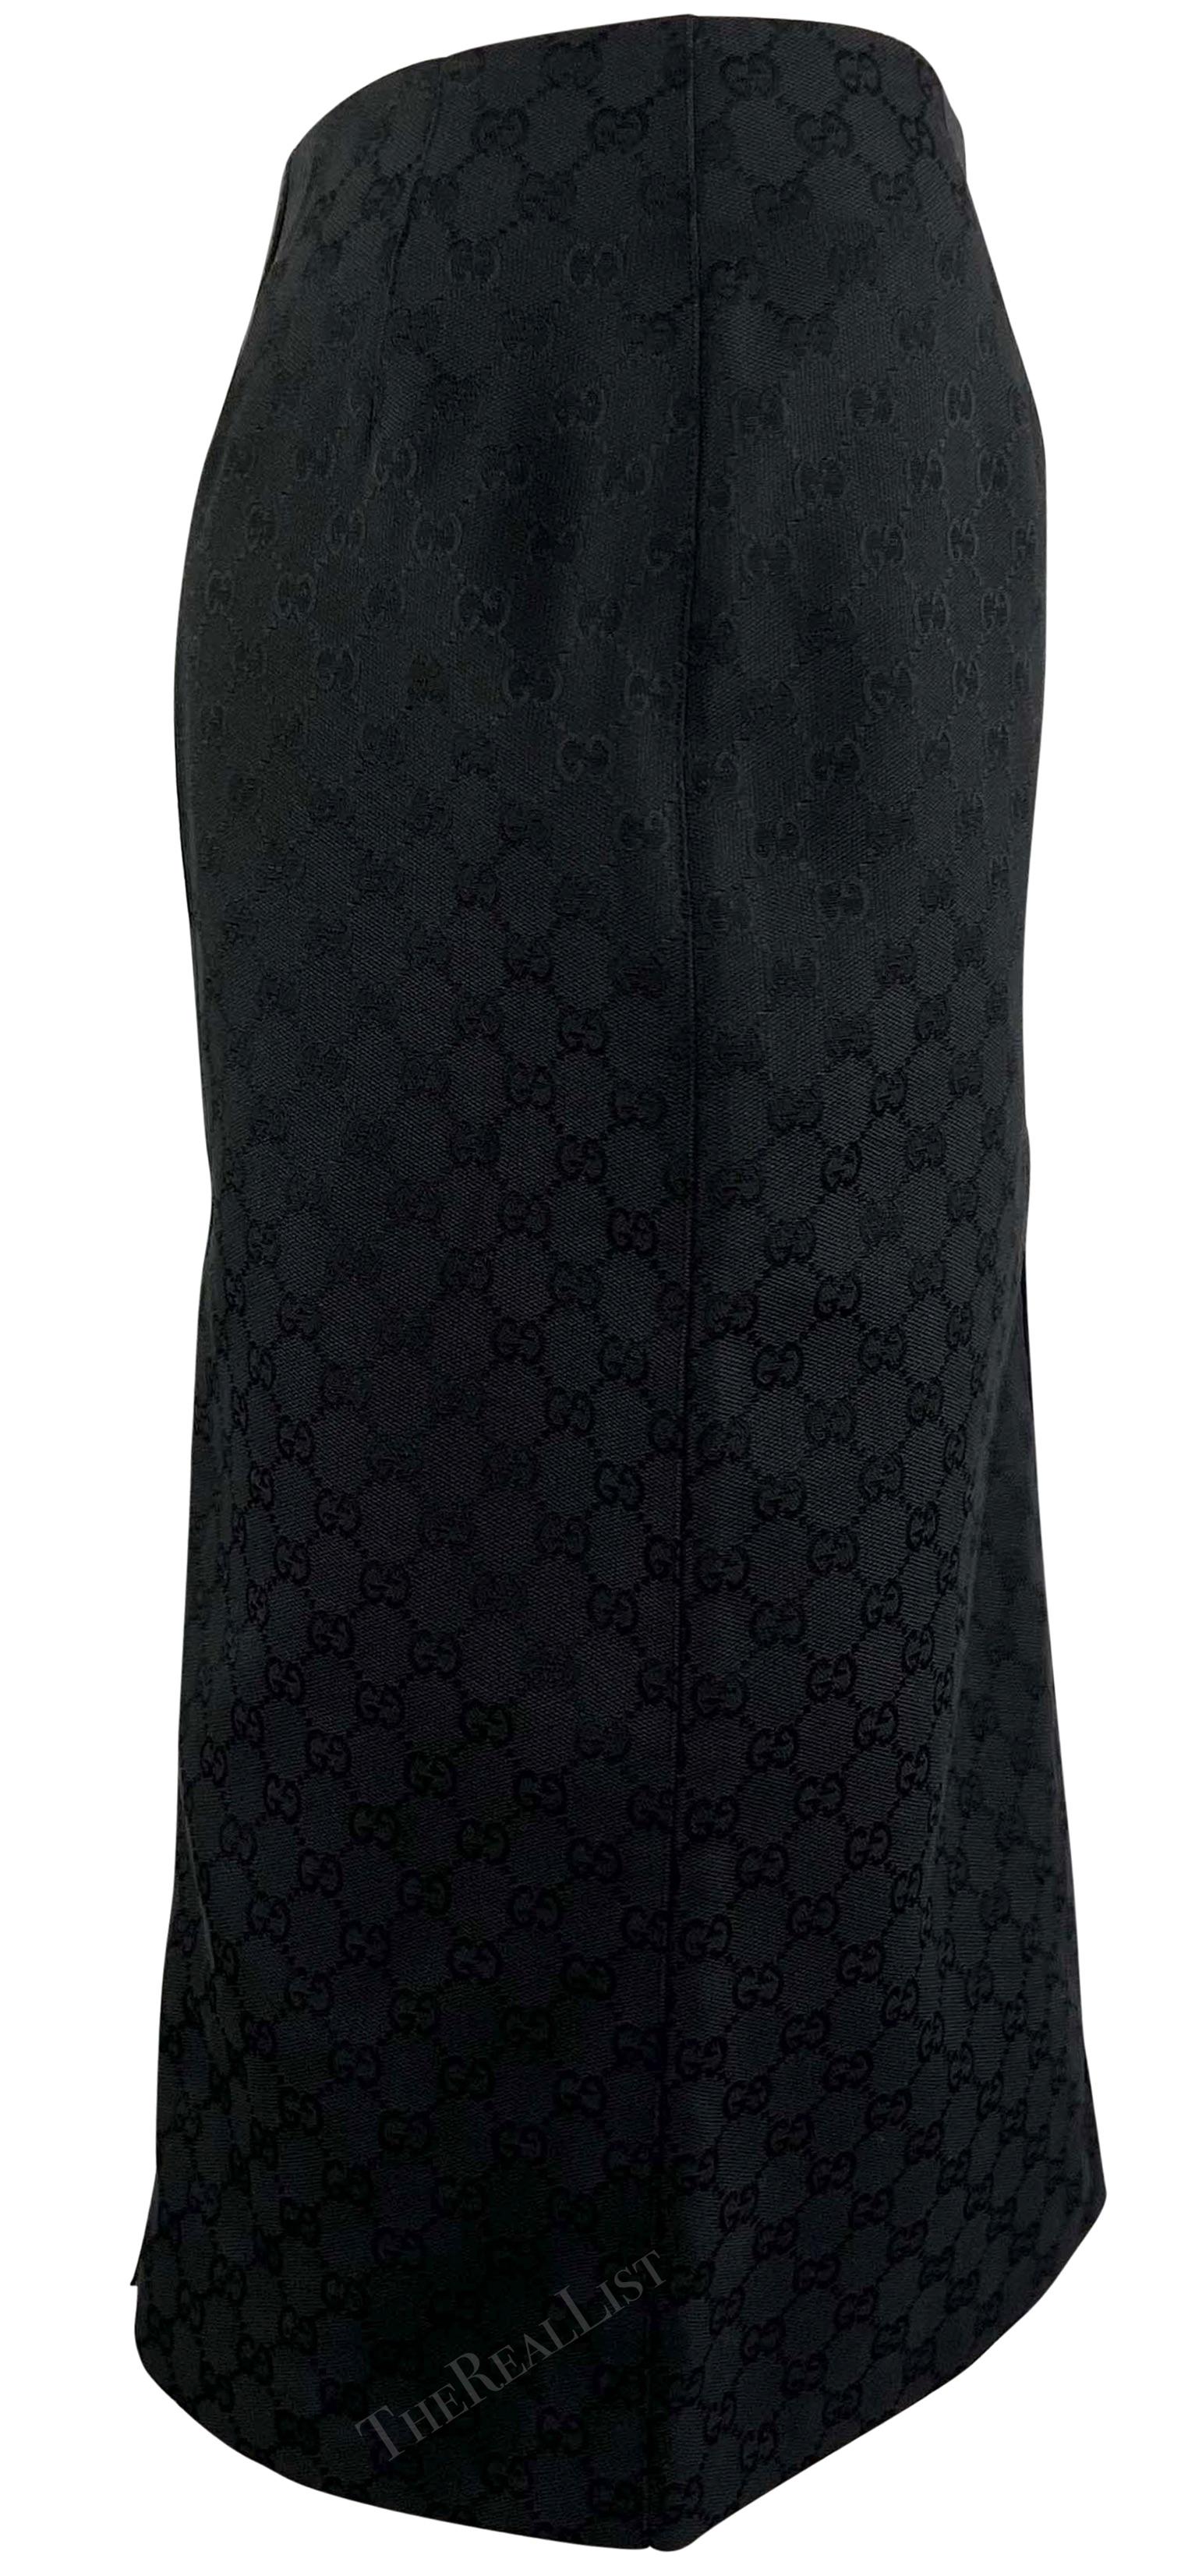 F/W 2000 Gucci by Tom Ford Black GG Monogram Zipper Pencil Skirt For Sale 1